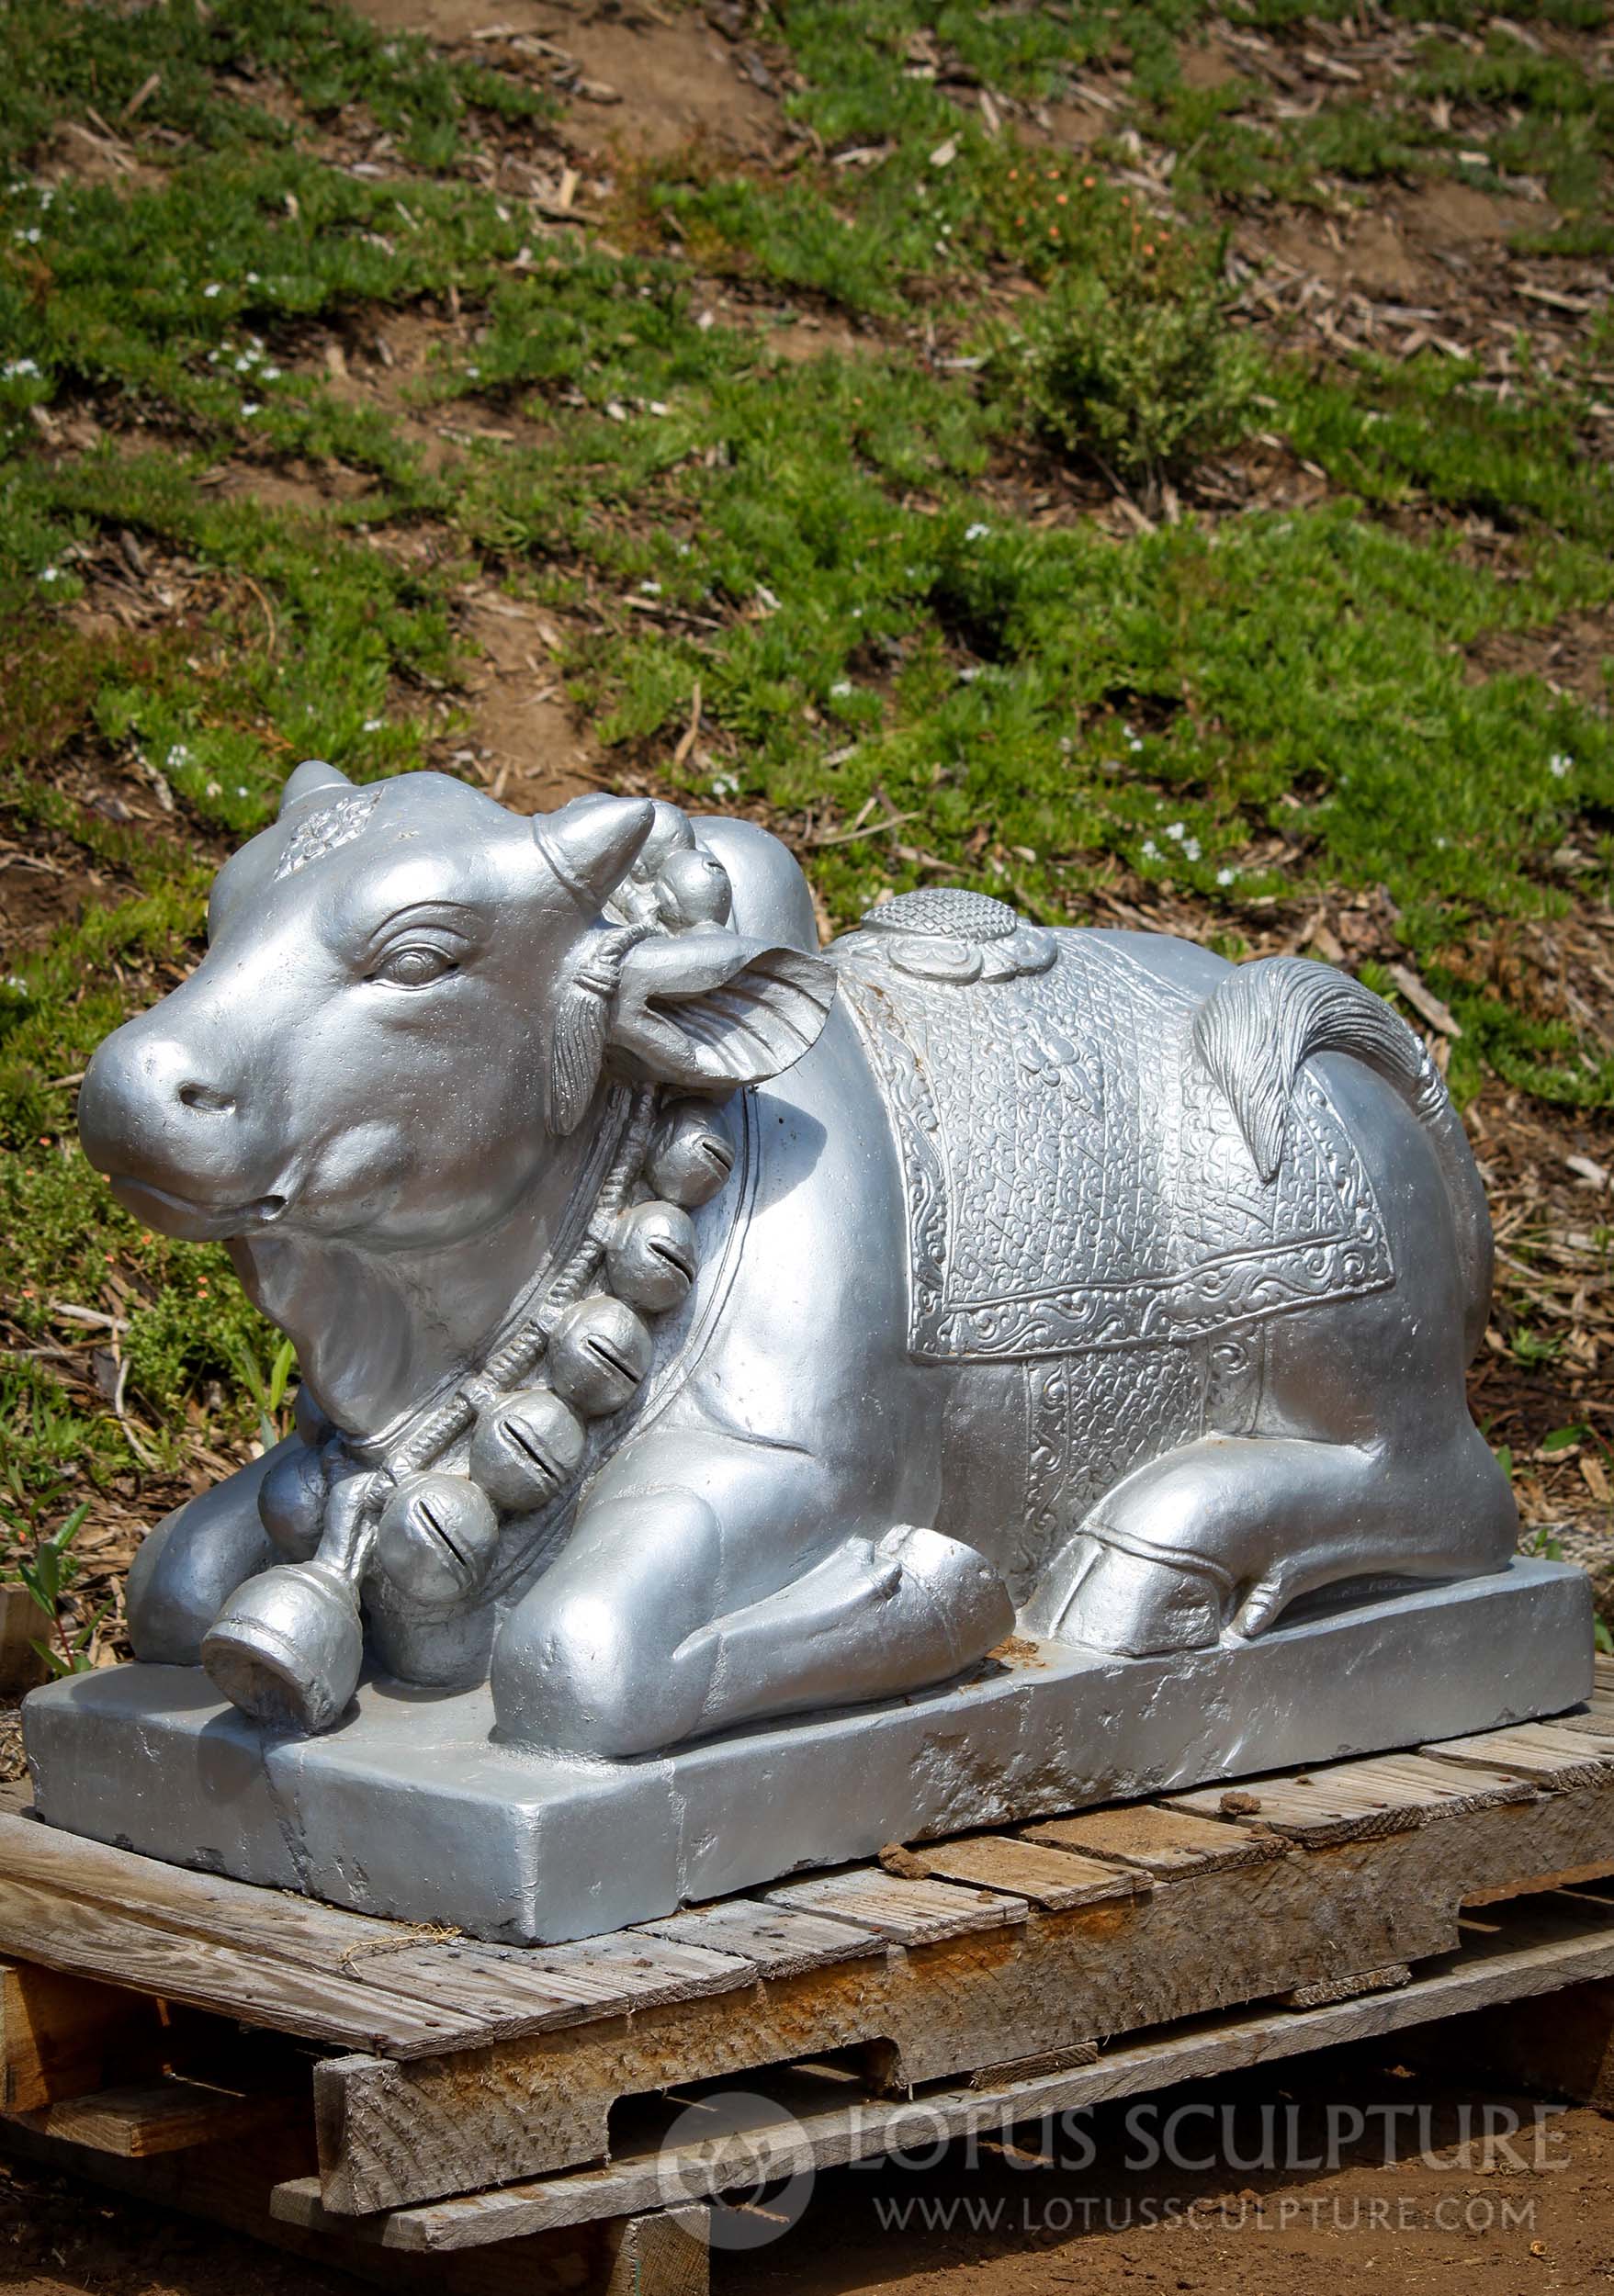 SOLD Silver Stone Large Sculpture of the White Bull of Lord Shiva, Nandi,  Hand Carved in Indonesia 3 (#Broken6): Hindu Gods & Buddha Statues